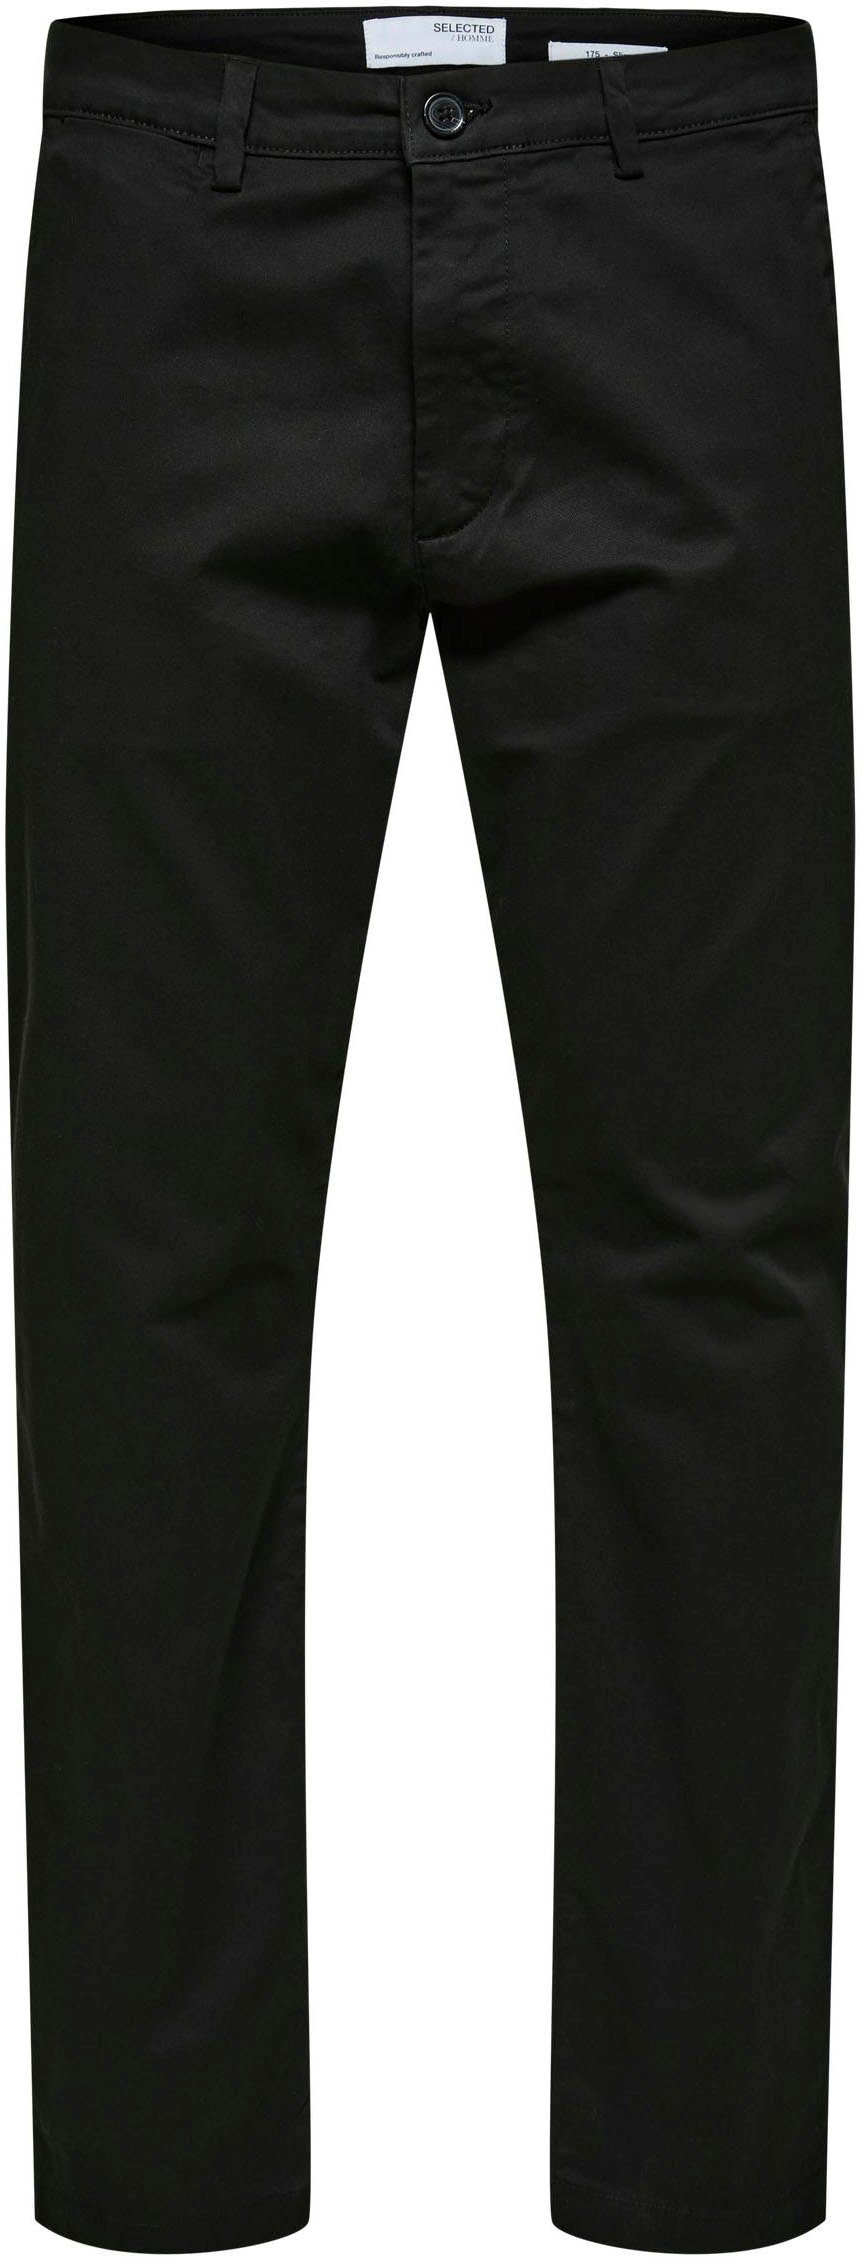 PANT SELECTED Chinohose FLEX black HOMME NEW SLH175-SLIM NOOS MILES